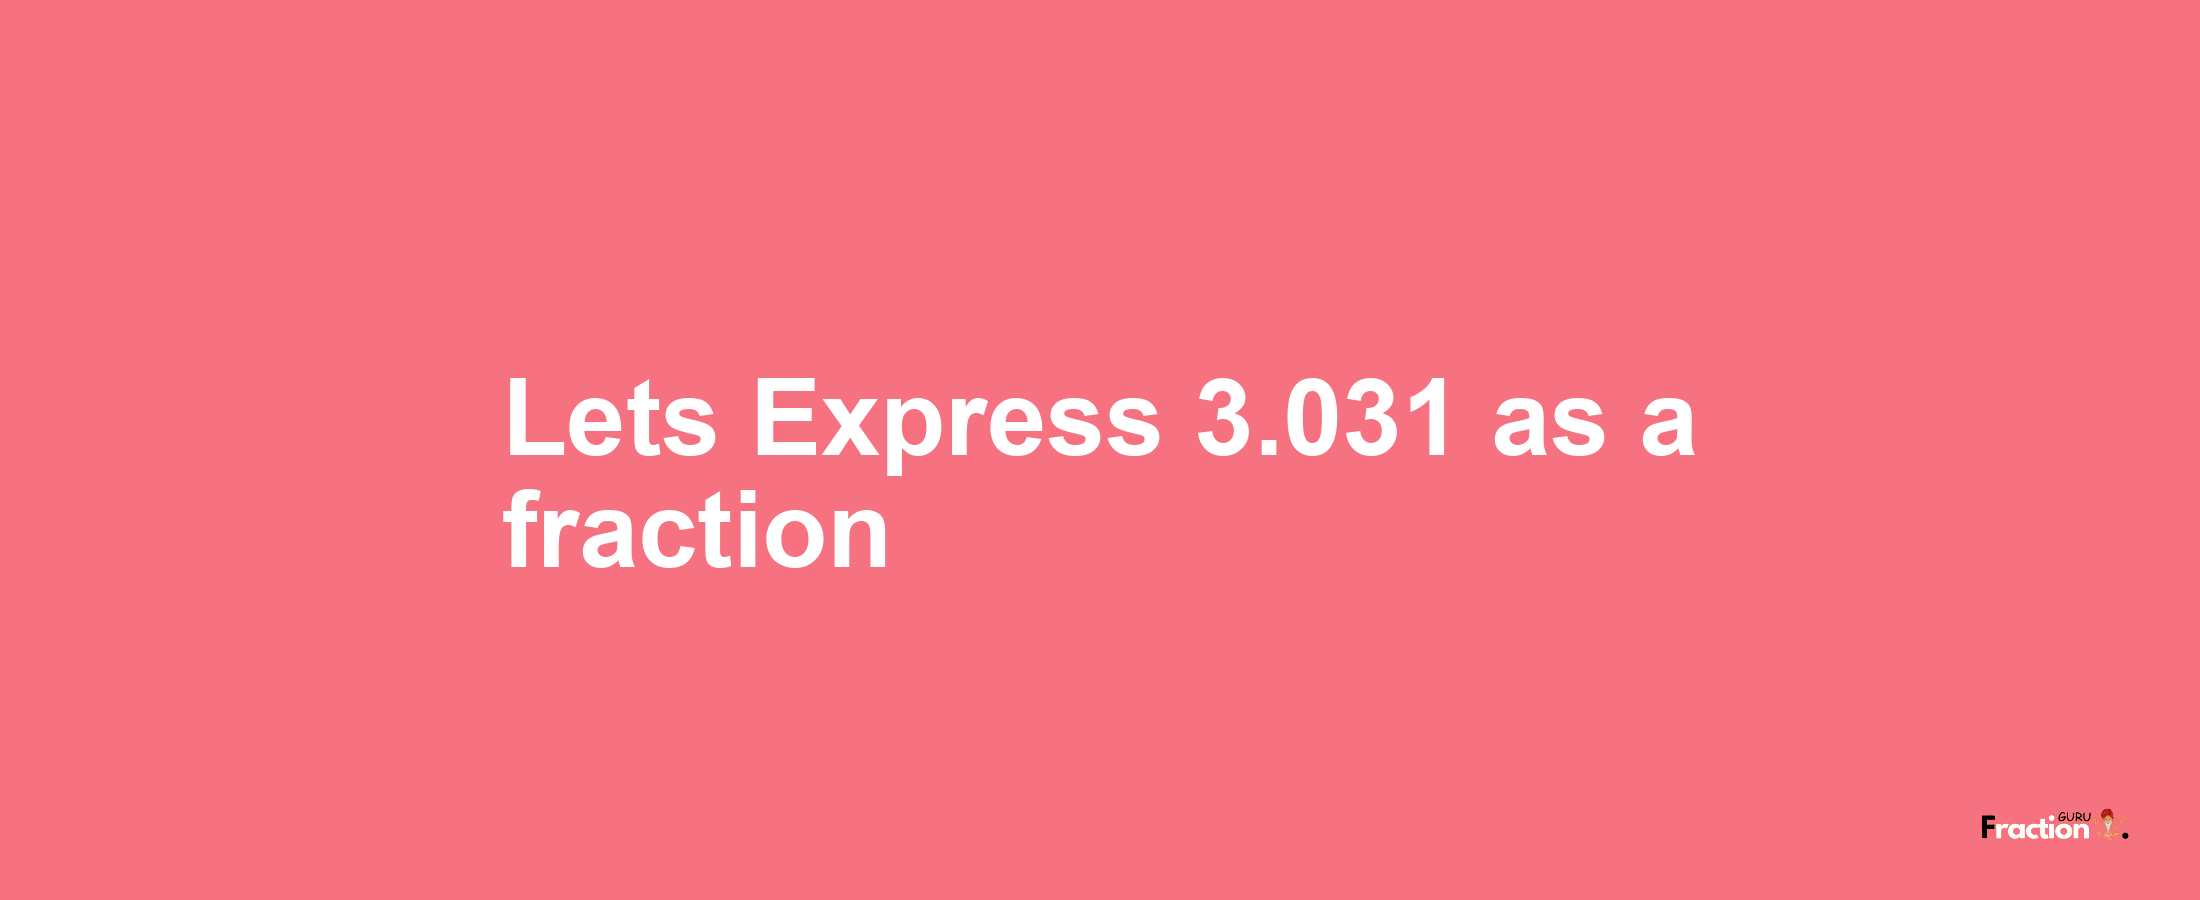 Lets Express 3.031 as afraction